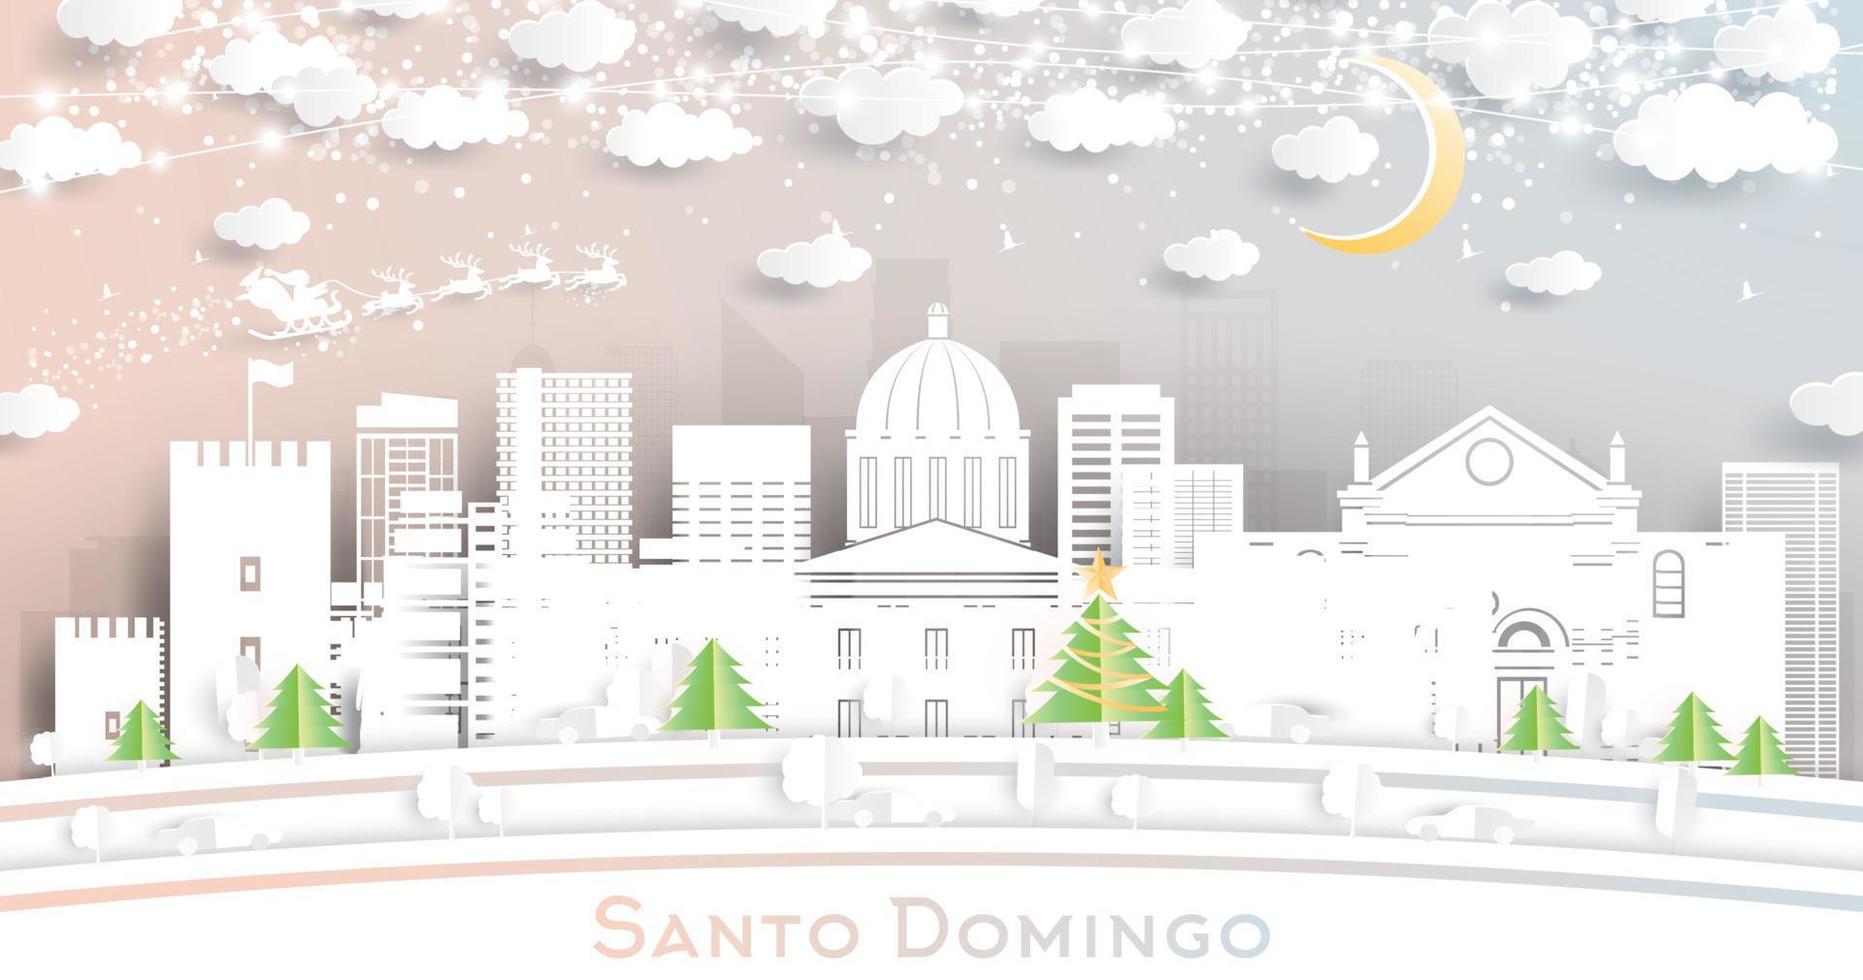 Santo Domingo Dominican Republic City Skyline in Paper Cut Style with Snowflakes, Moon and Neon Garland. vector